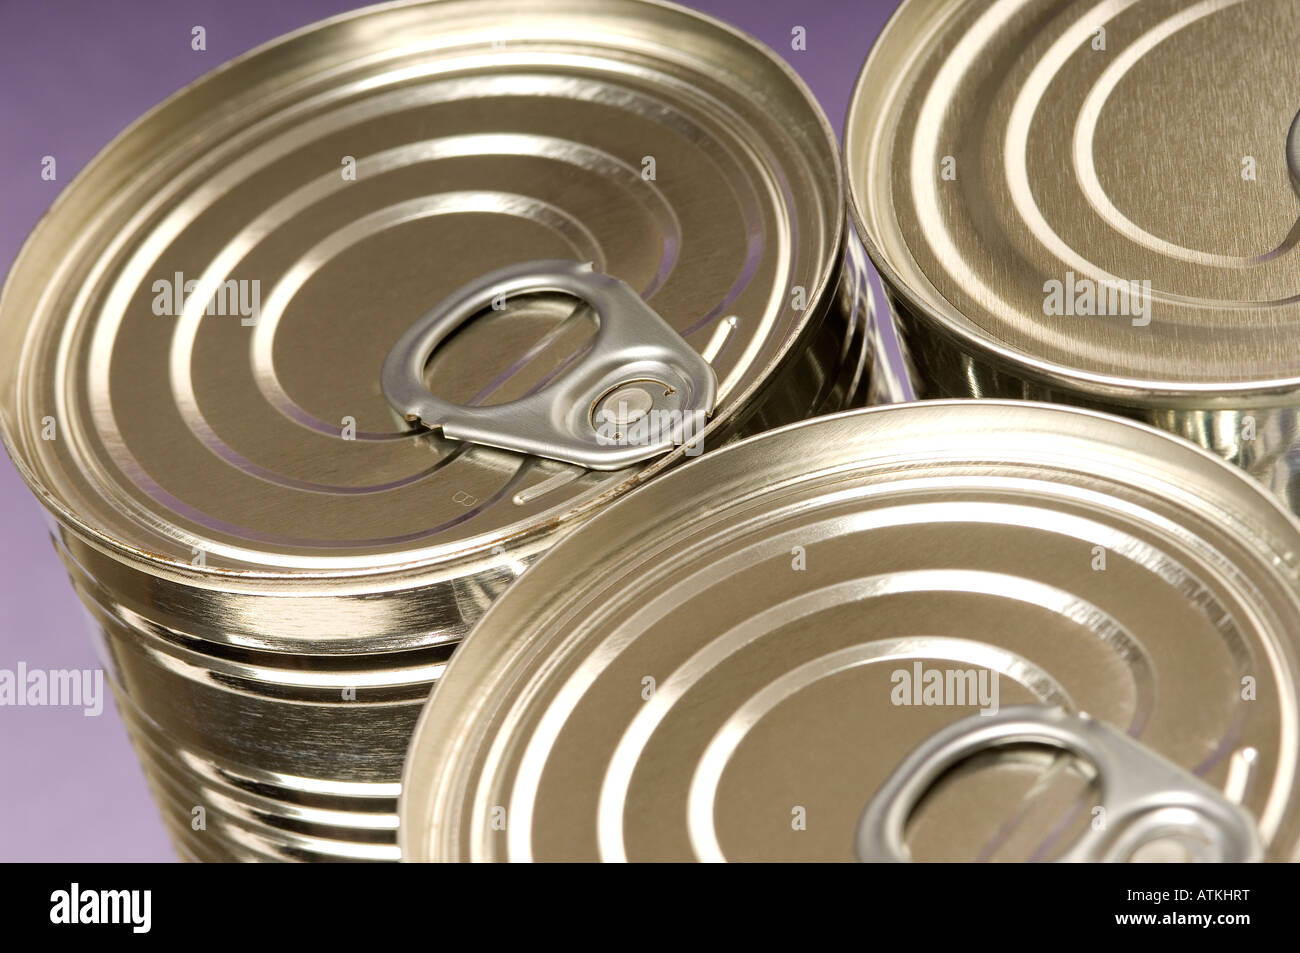 Close up of Ring Pull Food Tins Cans Stock Photo